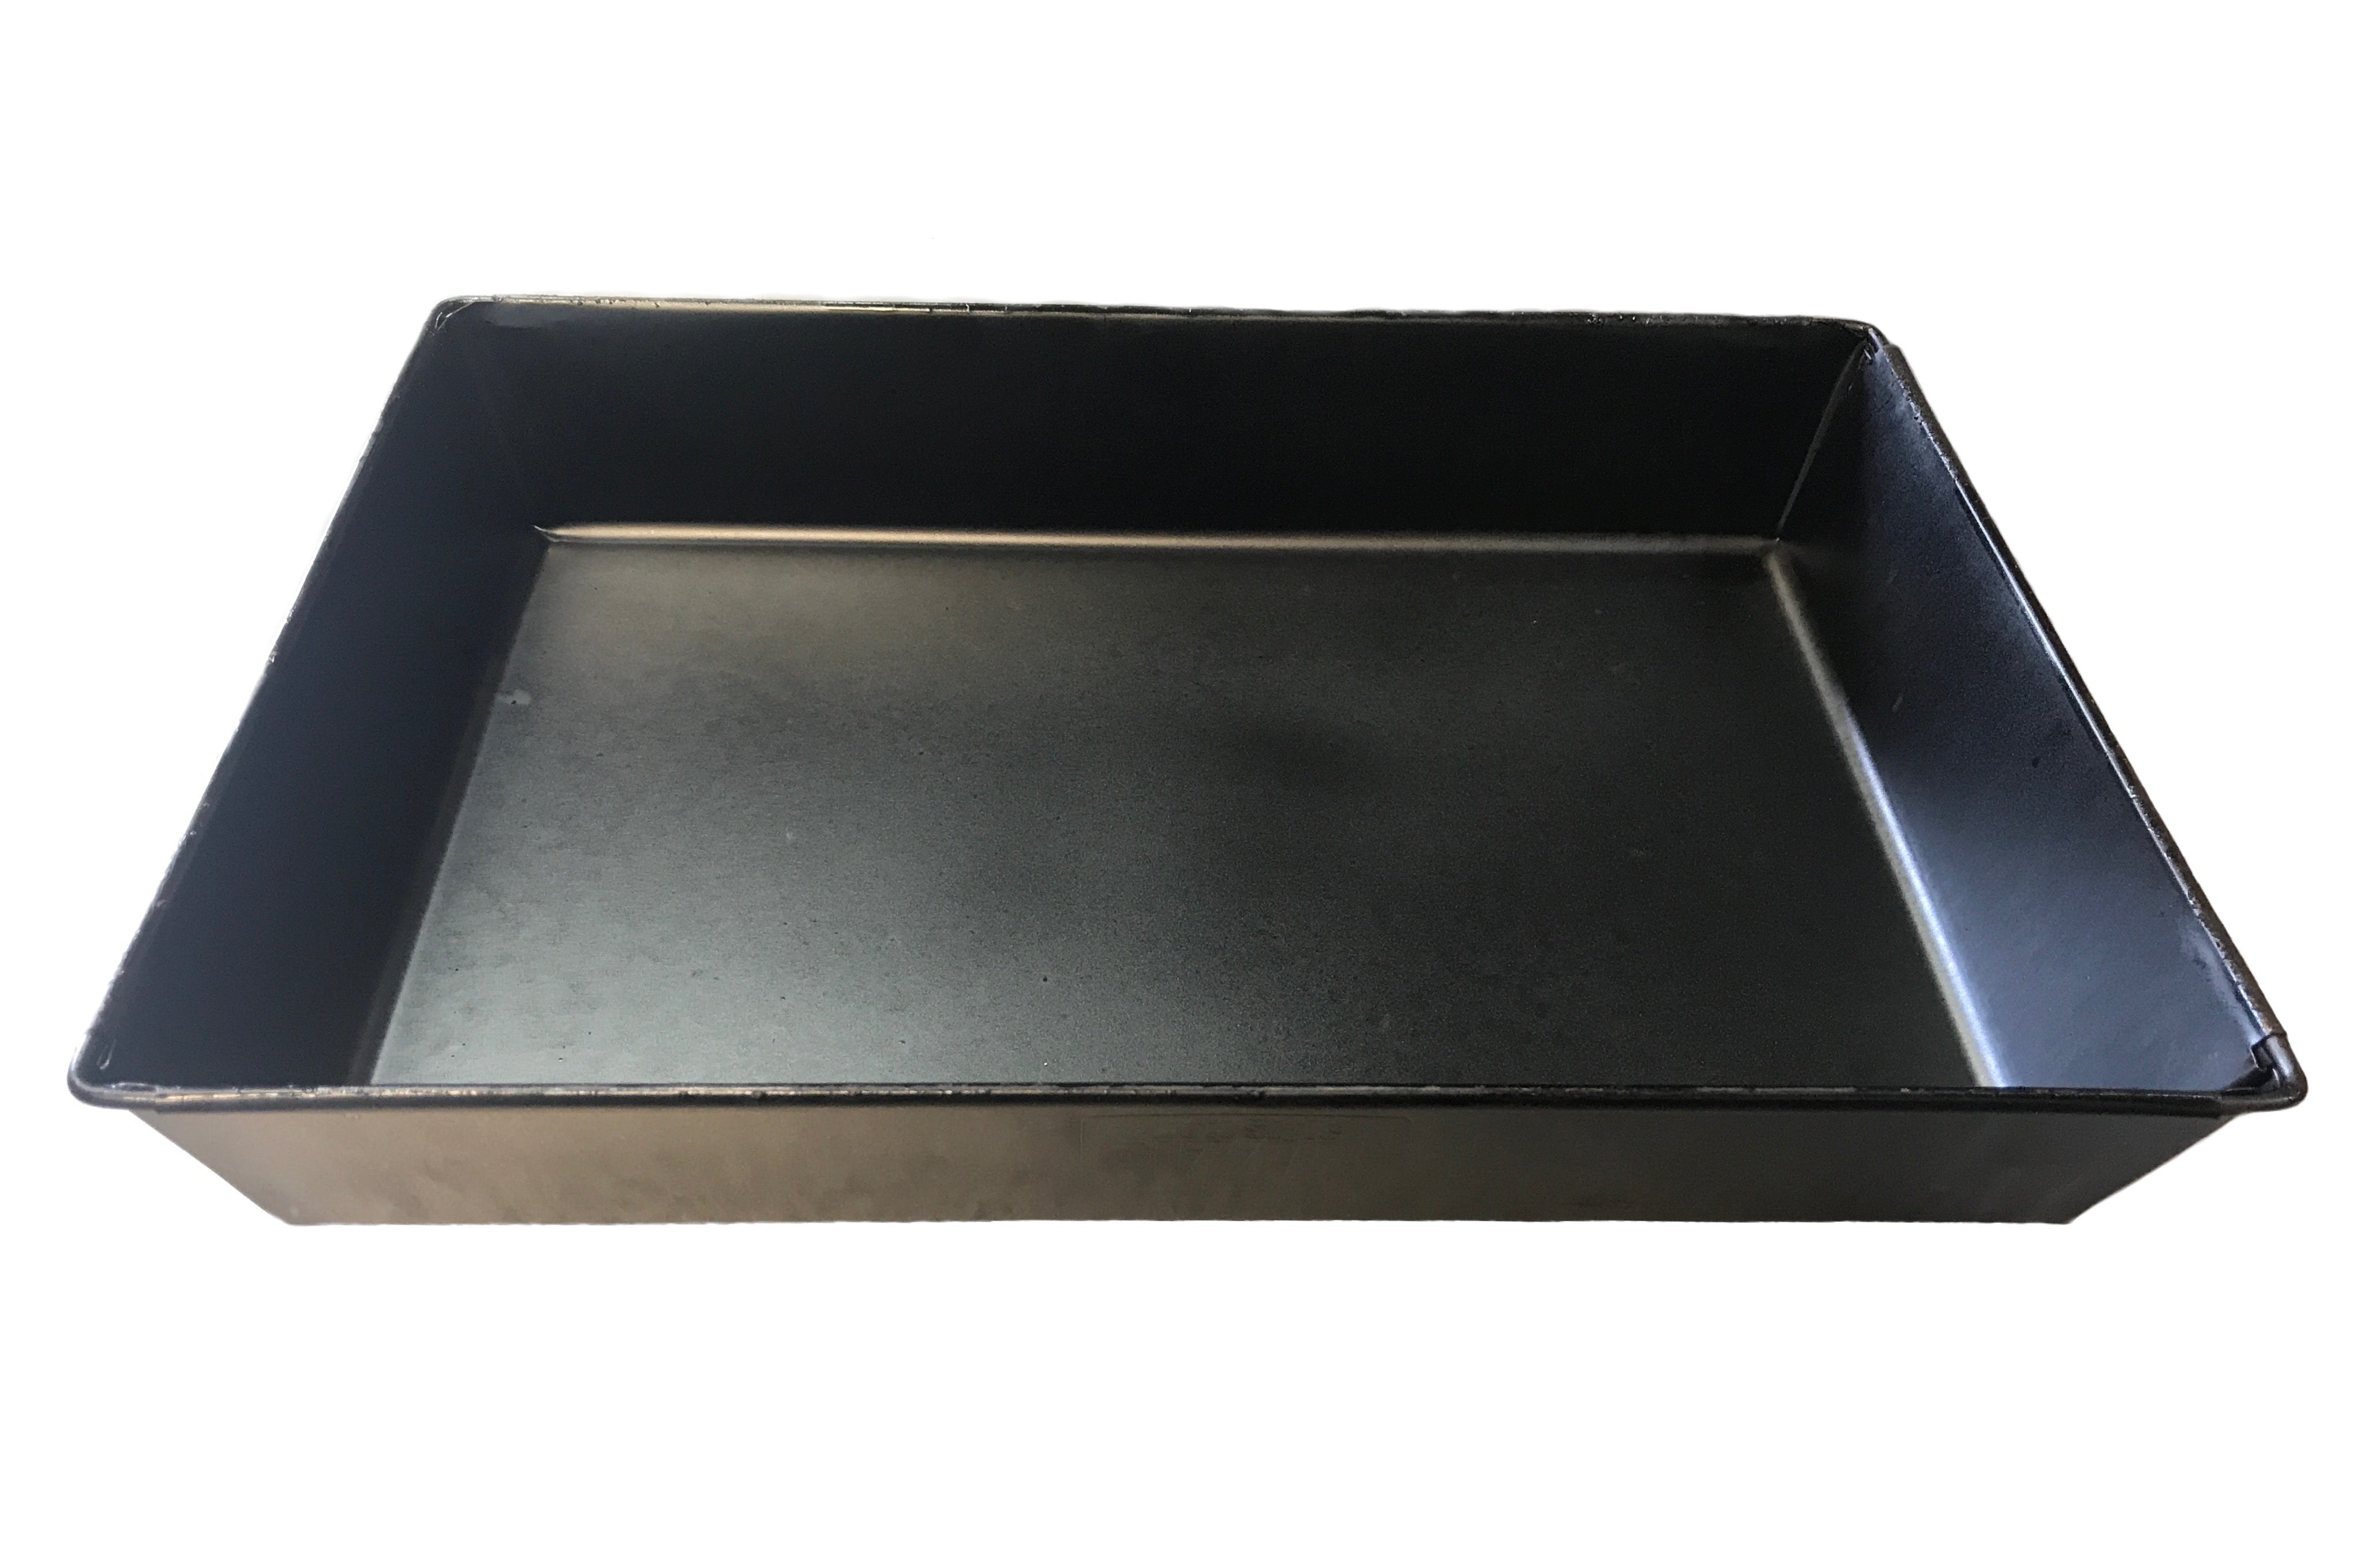 Nordic Ware oven crisp baking tray - household items - by owner - craigslist